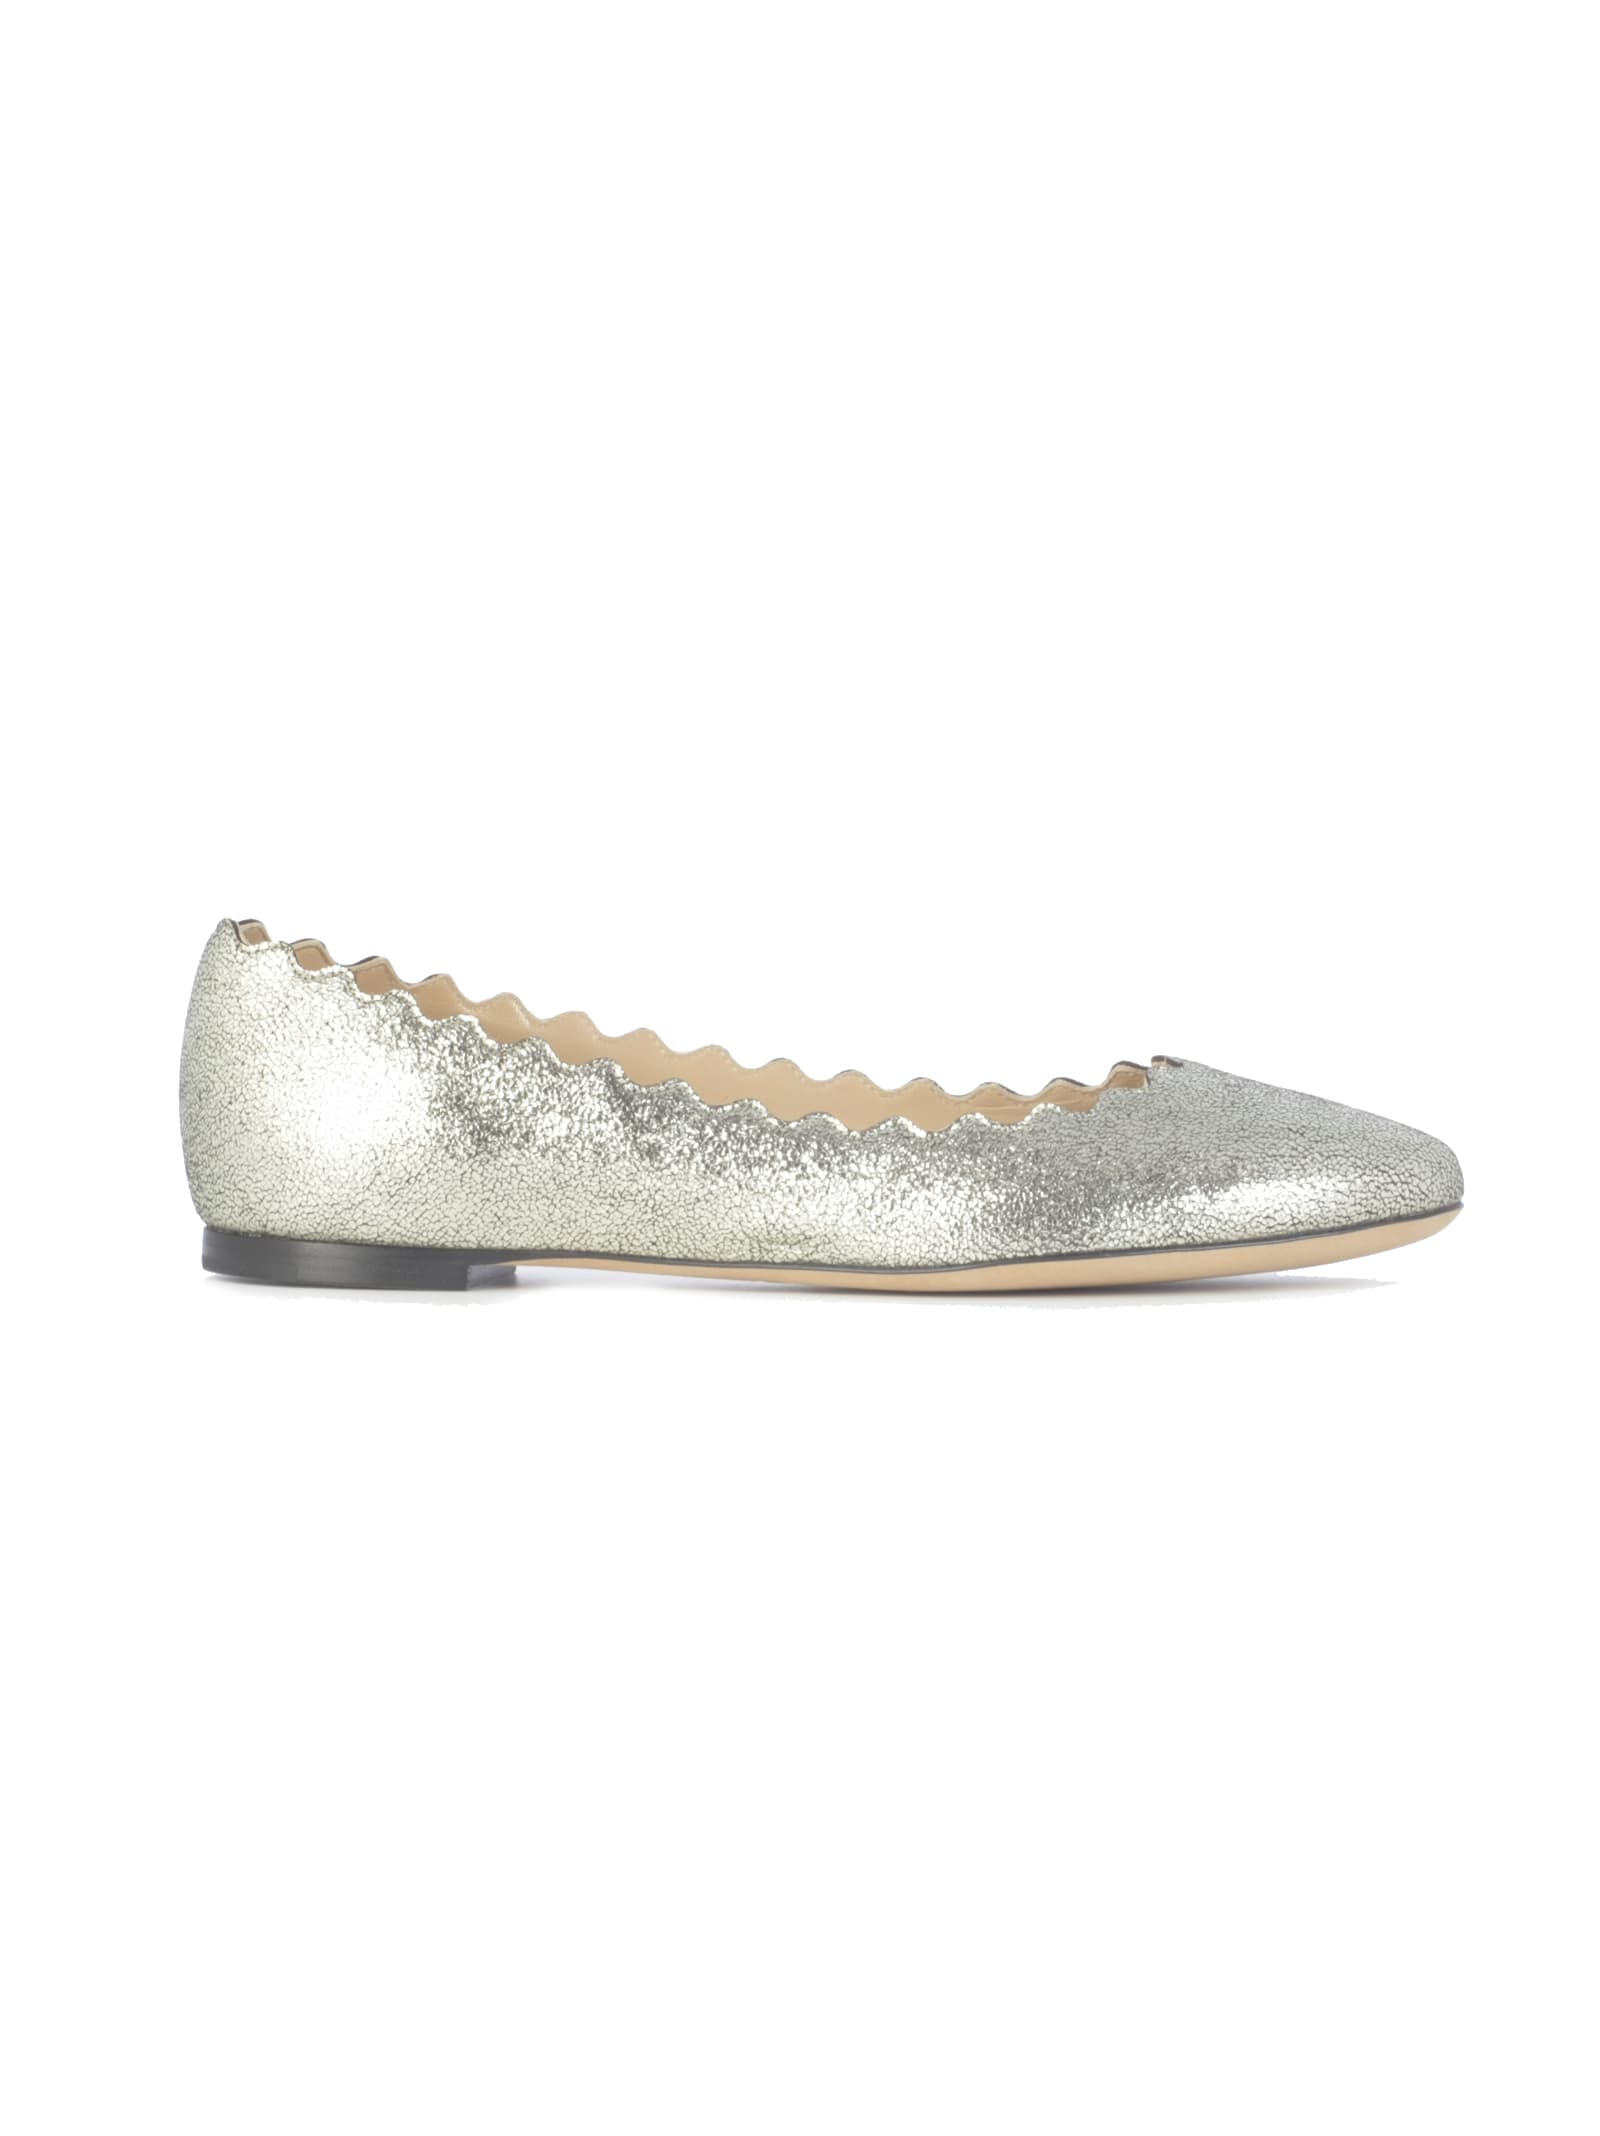 Chloé Glitter Ballerinas With Scalloped Details In Grey